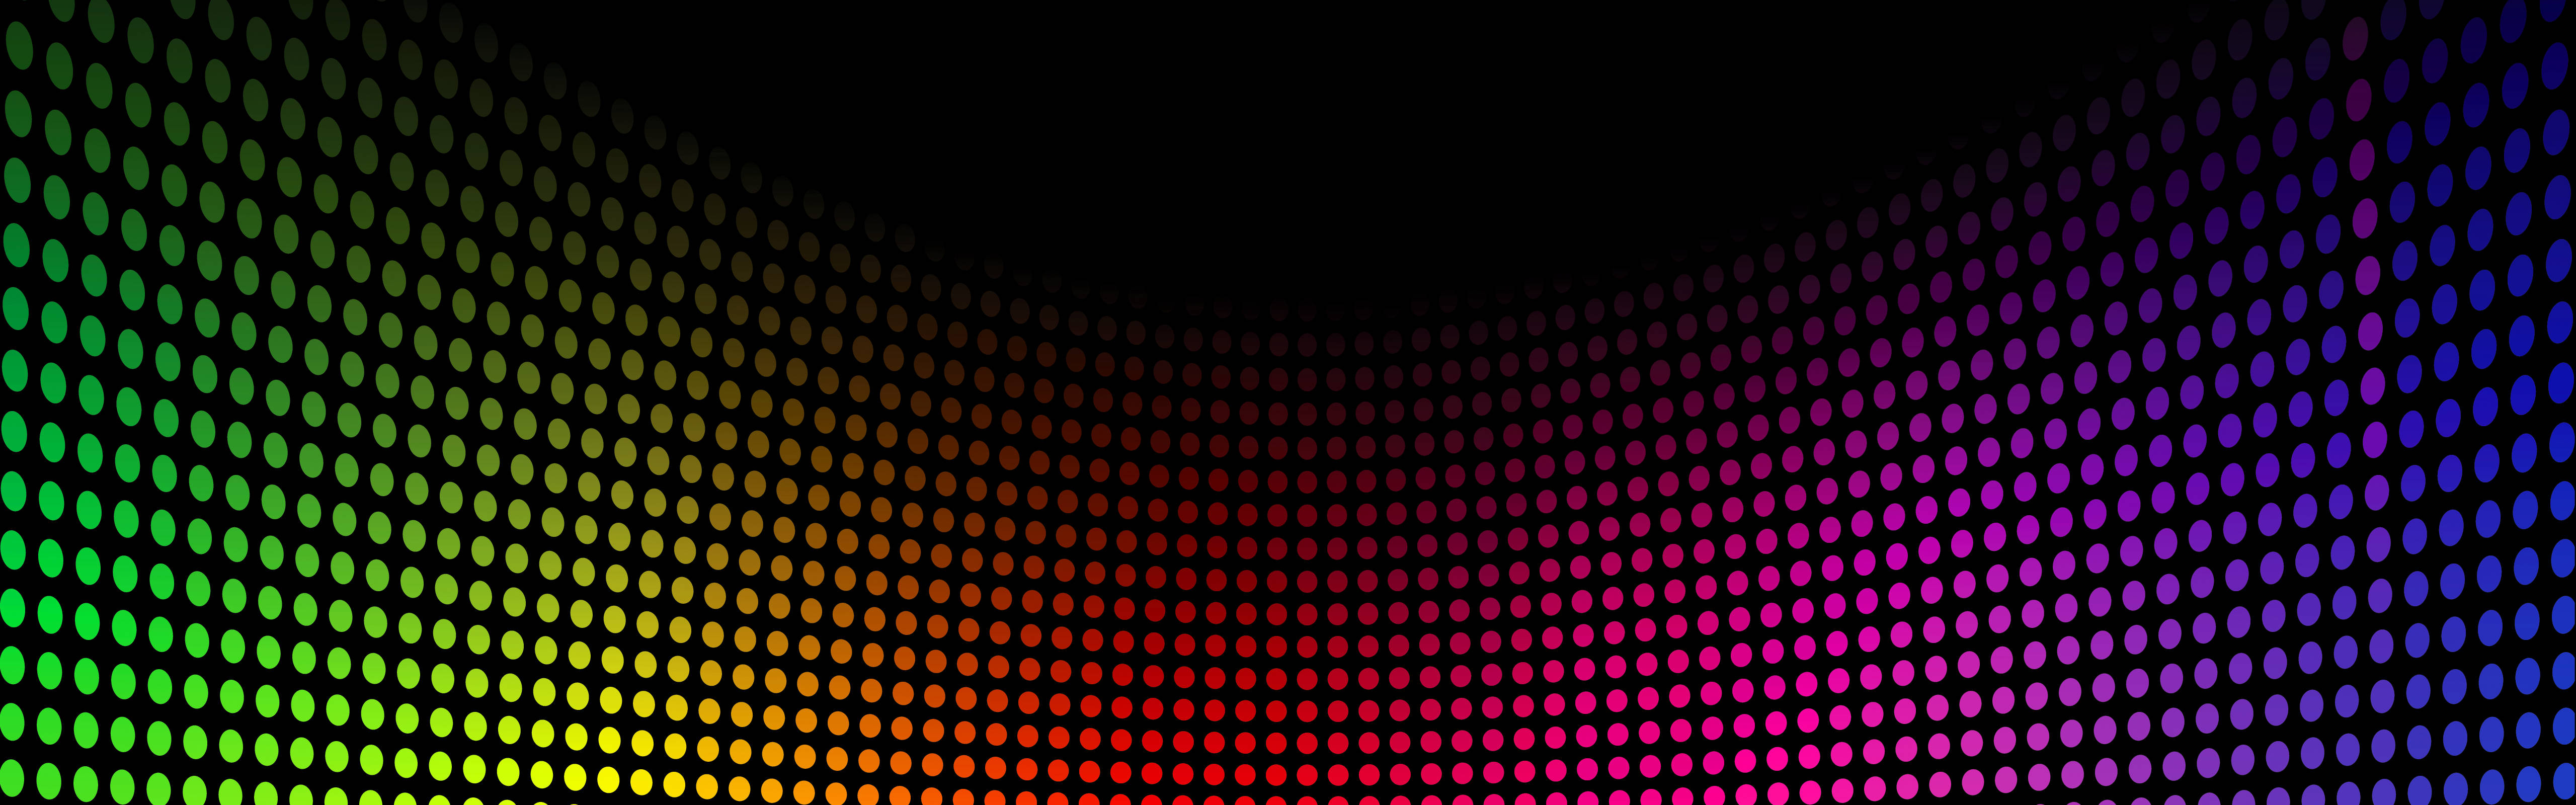 Cool Led Colorful Lights Wallpaper